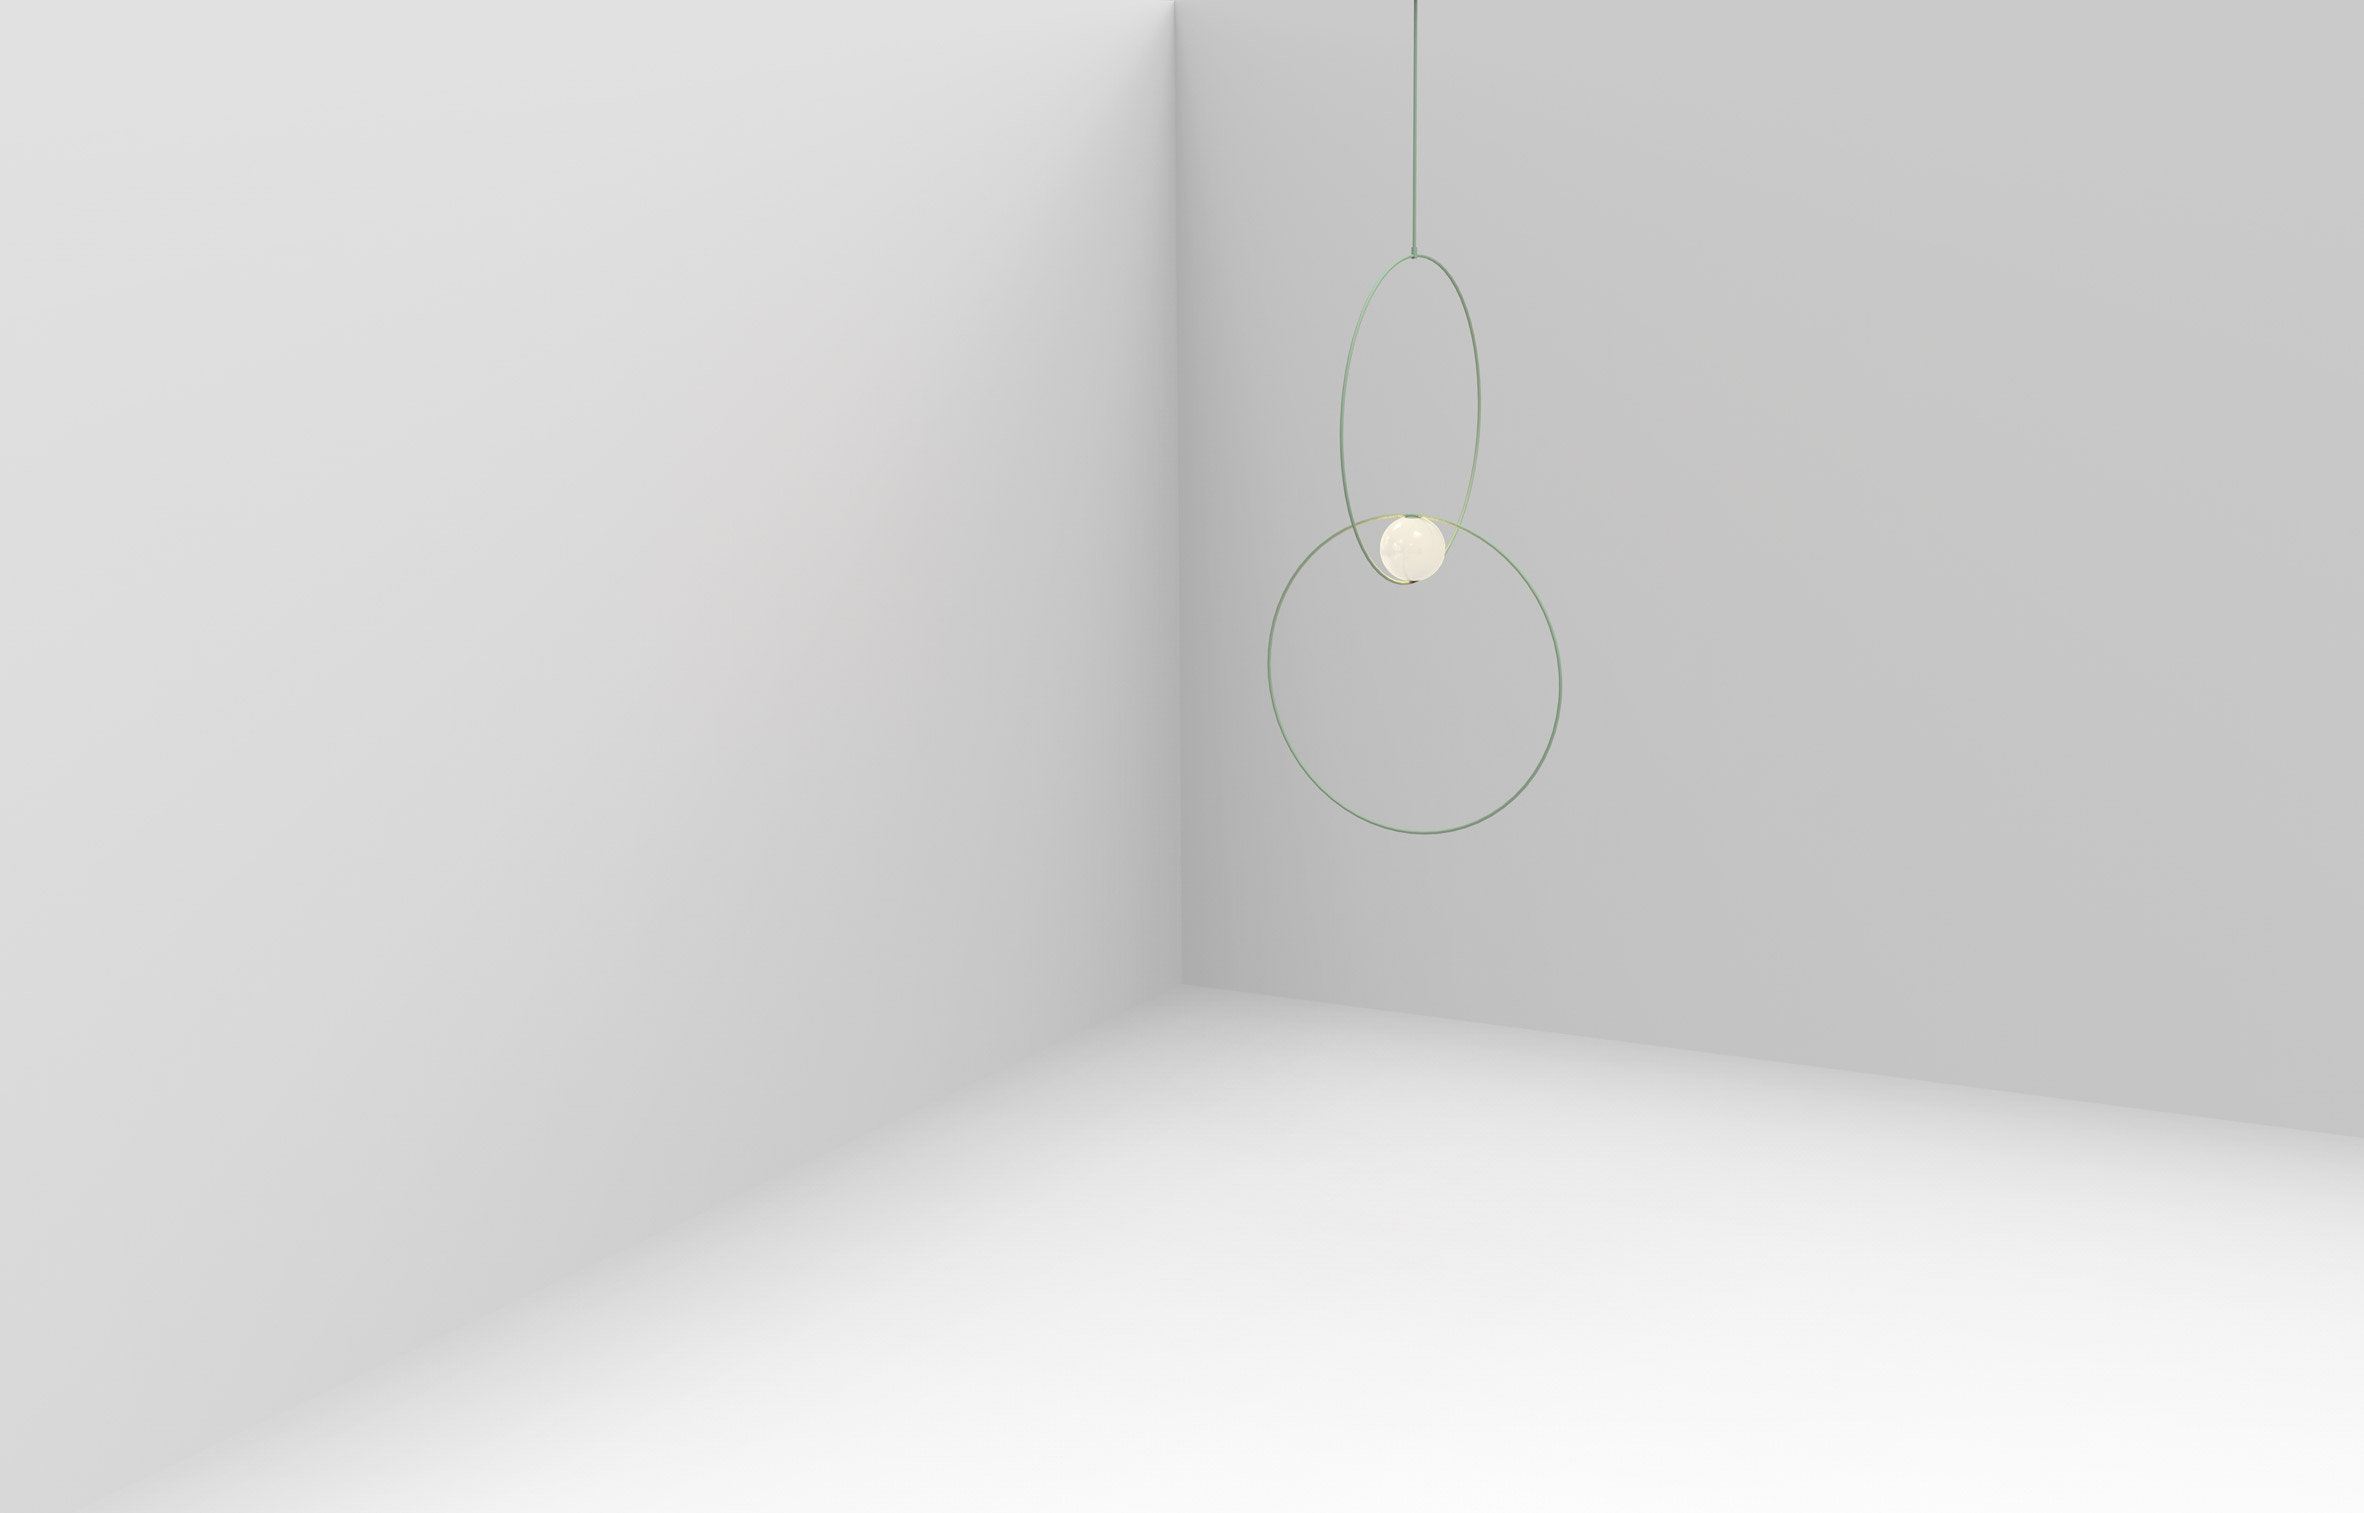 bespoke-loop-collection-by-michael-anastassiades-at-future-perfect-miami-design-lighting-_dezeen_2364_col_5